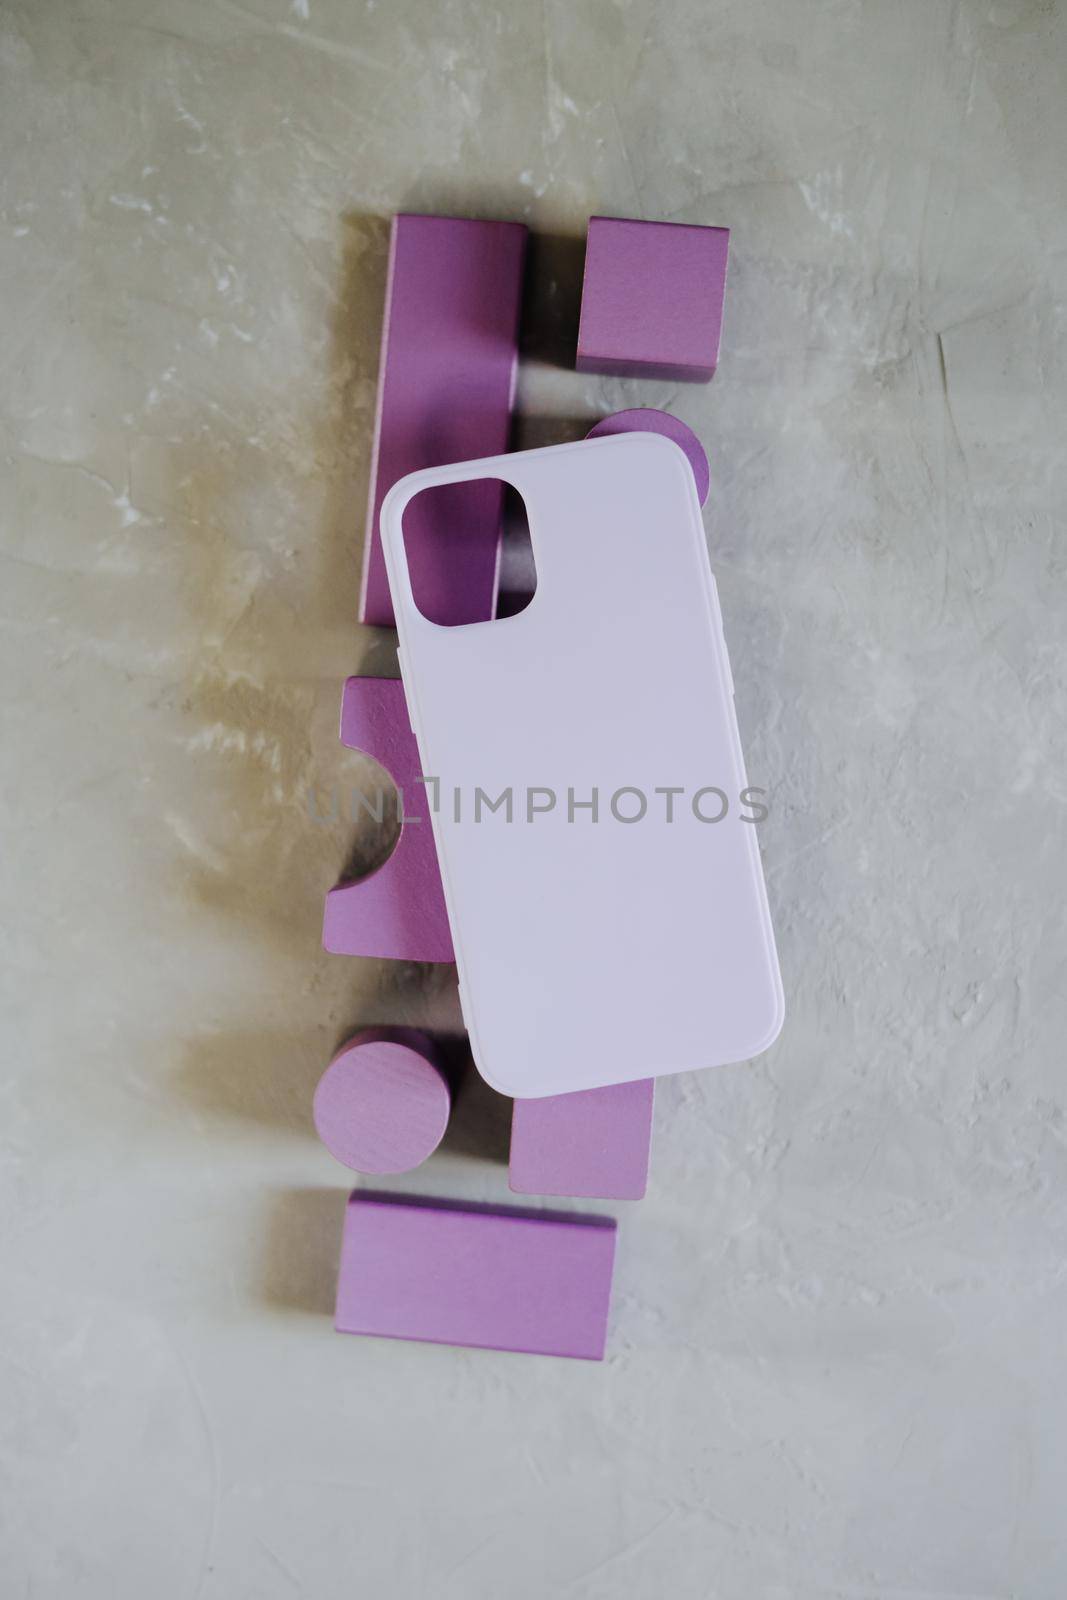 Silicone case of purple color lies on voluminous wooden purple details. Gray textured background.